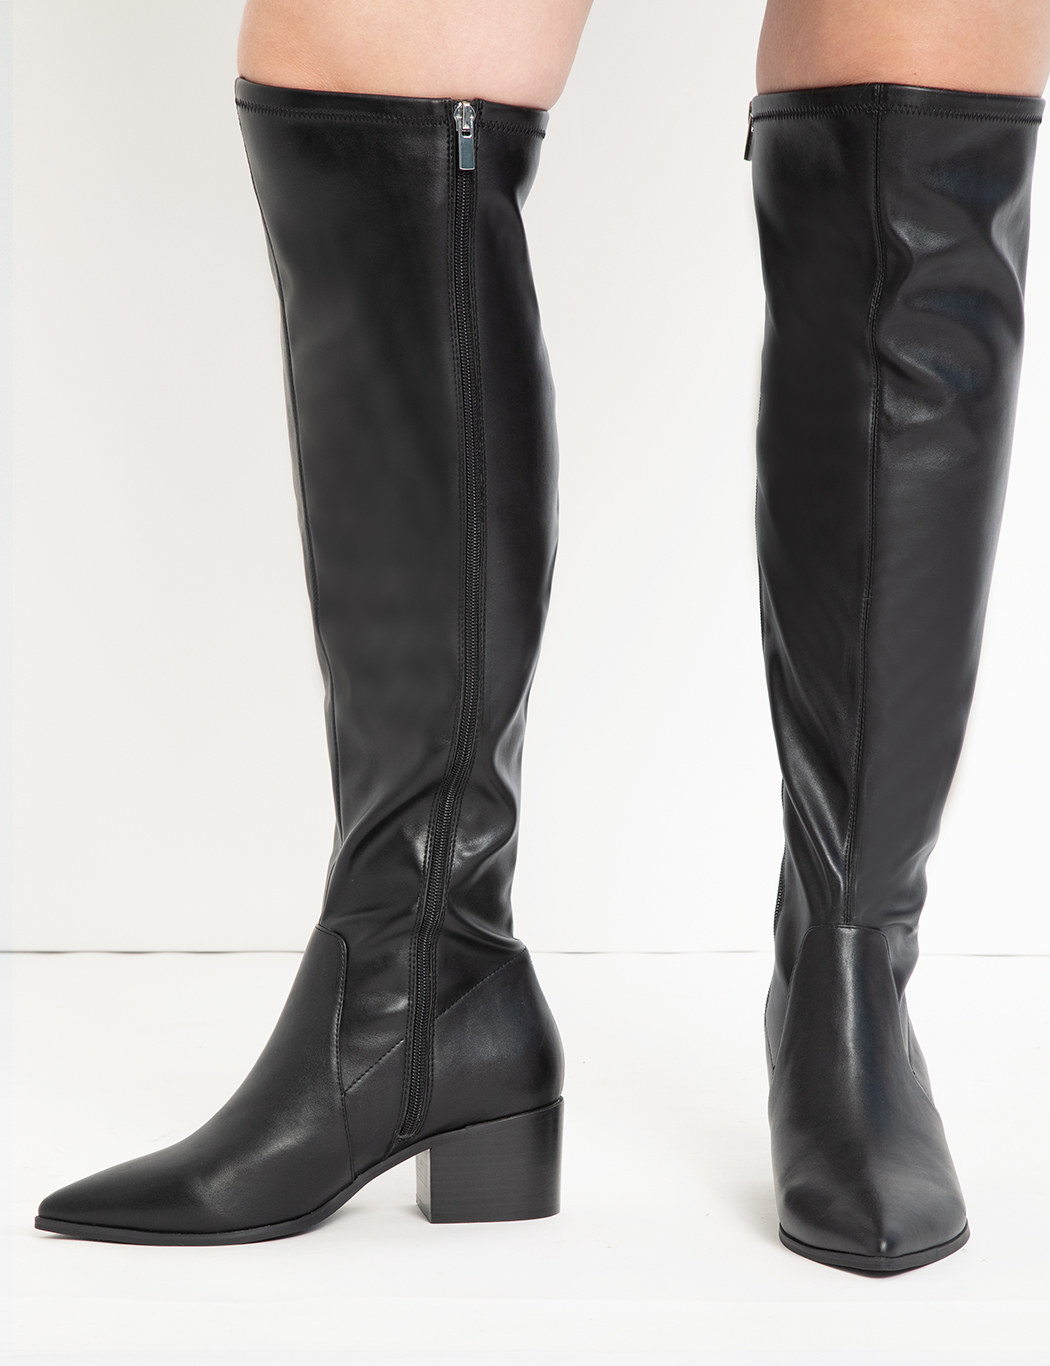 model wearing black pointed toe boots with side zipper